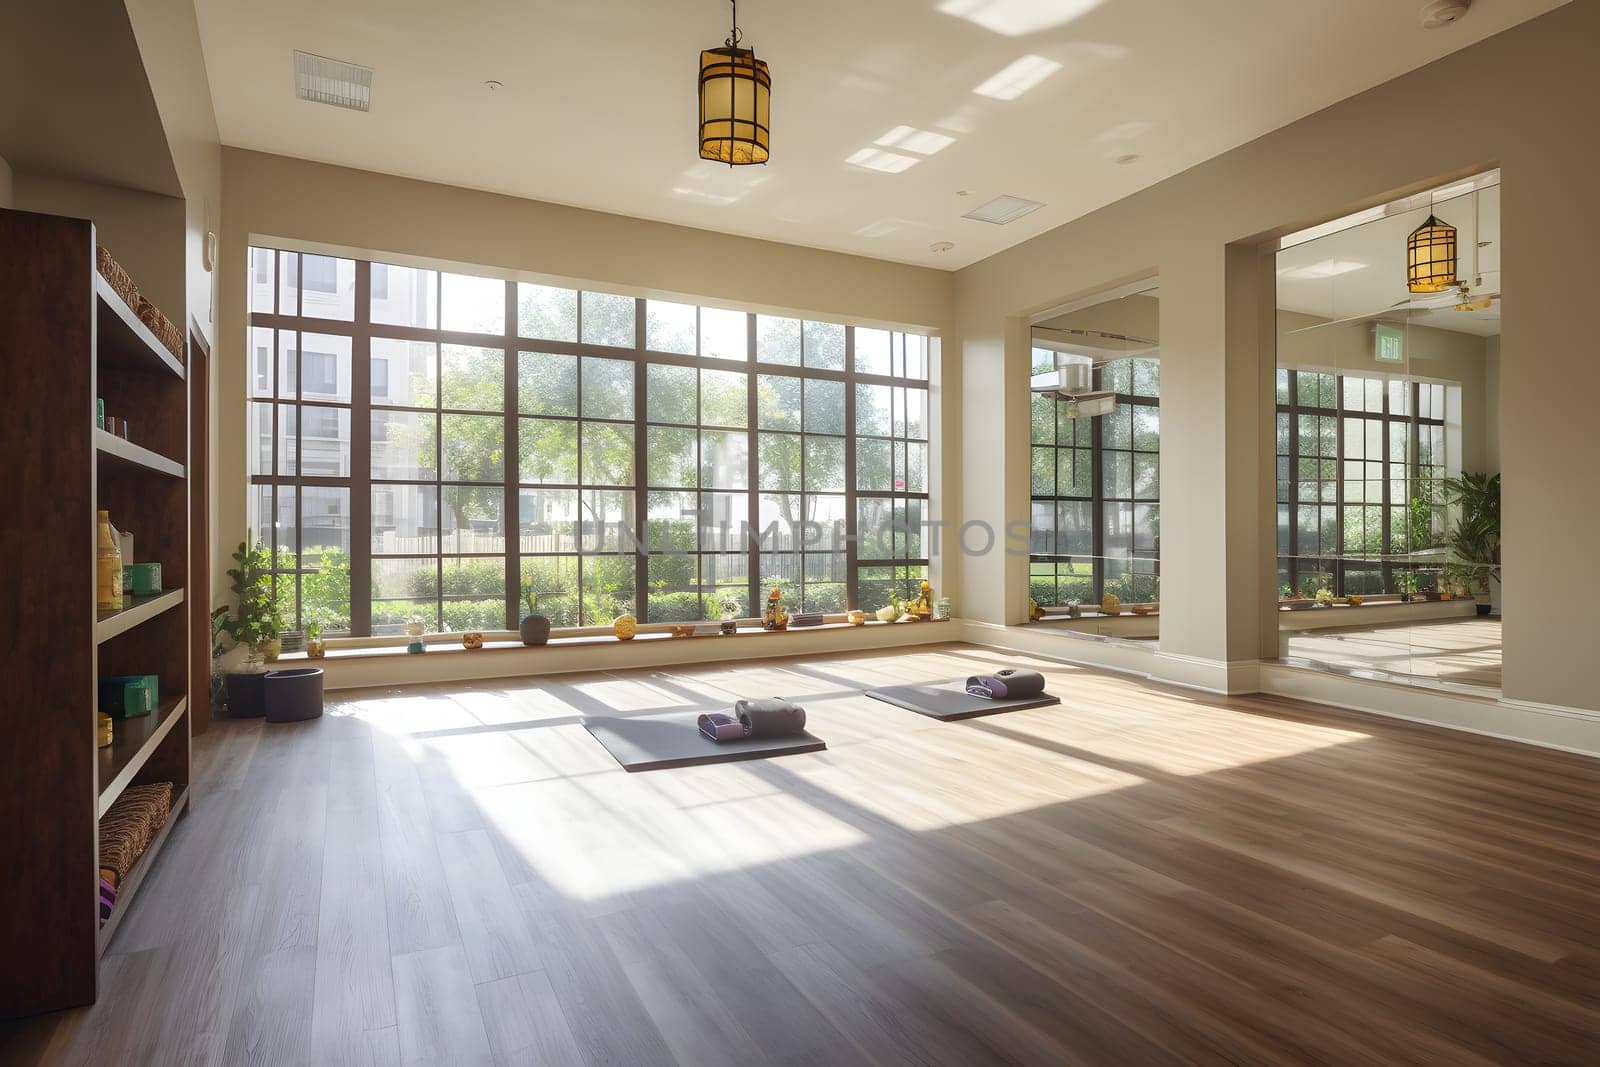 Yoga room with natural light from large windows, neural network generated photorealistic image by z1b